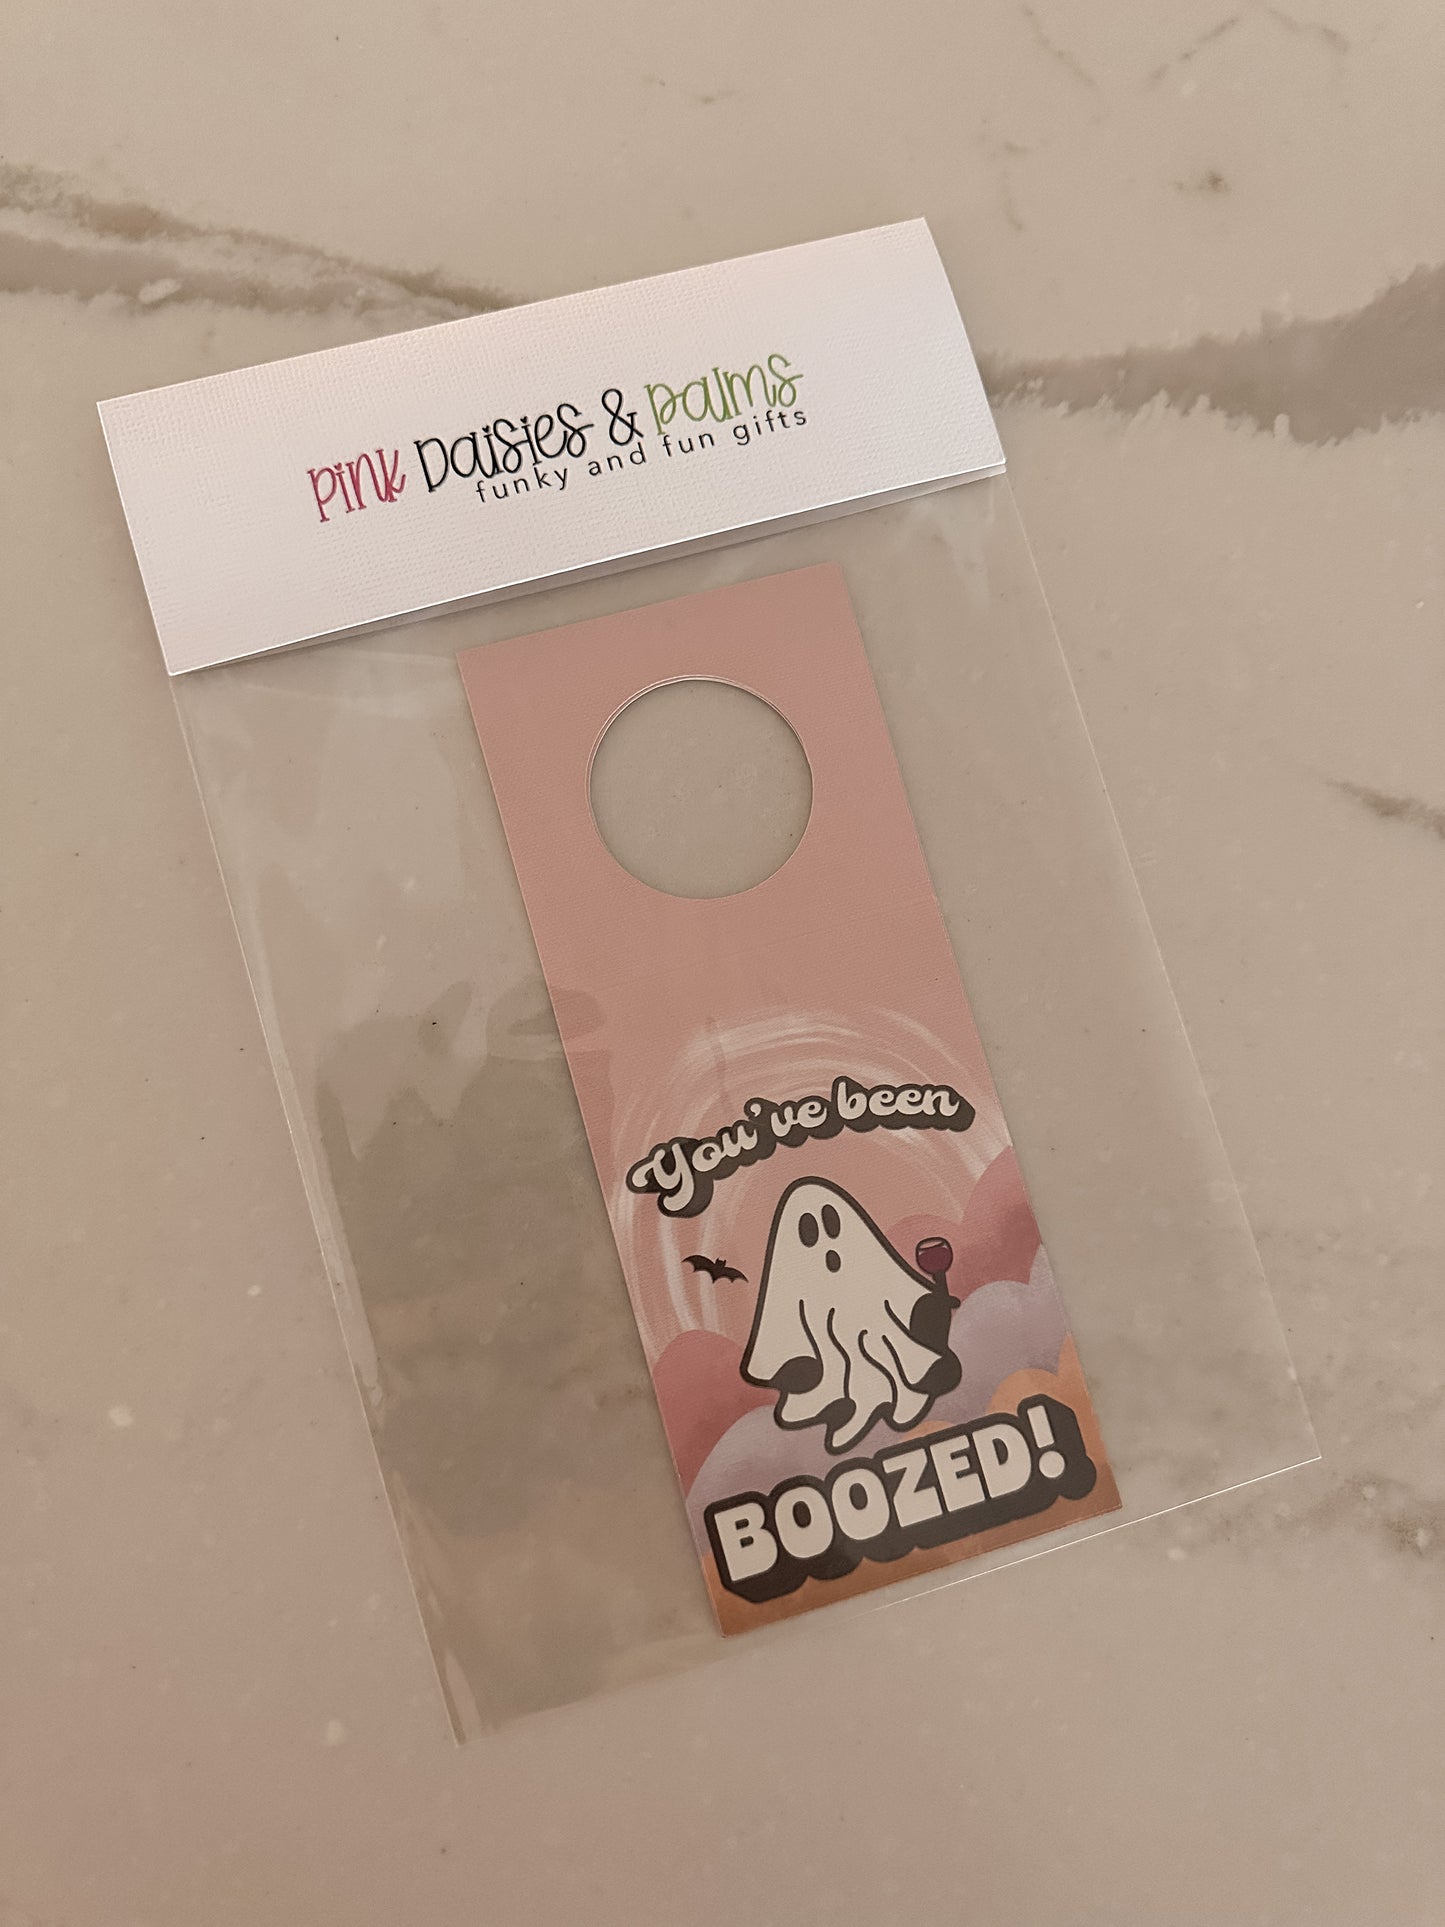 You’ve been ‘Boozed’ Wine Tags